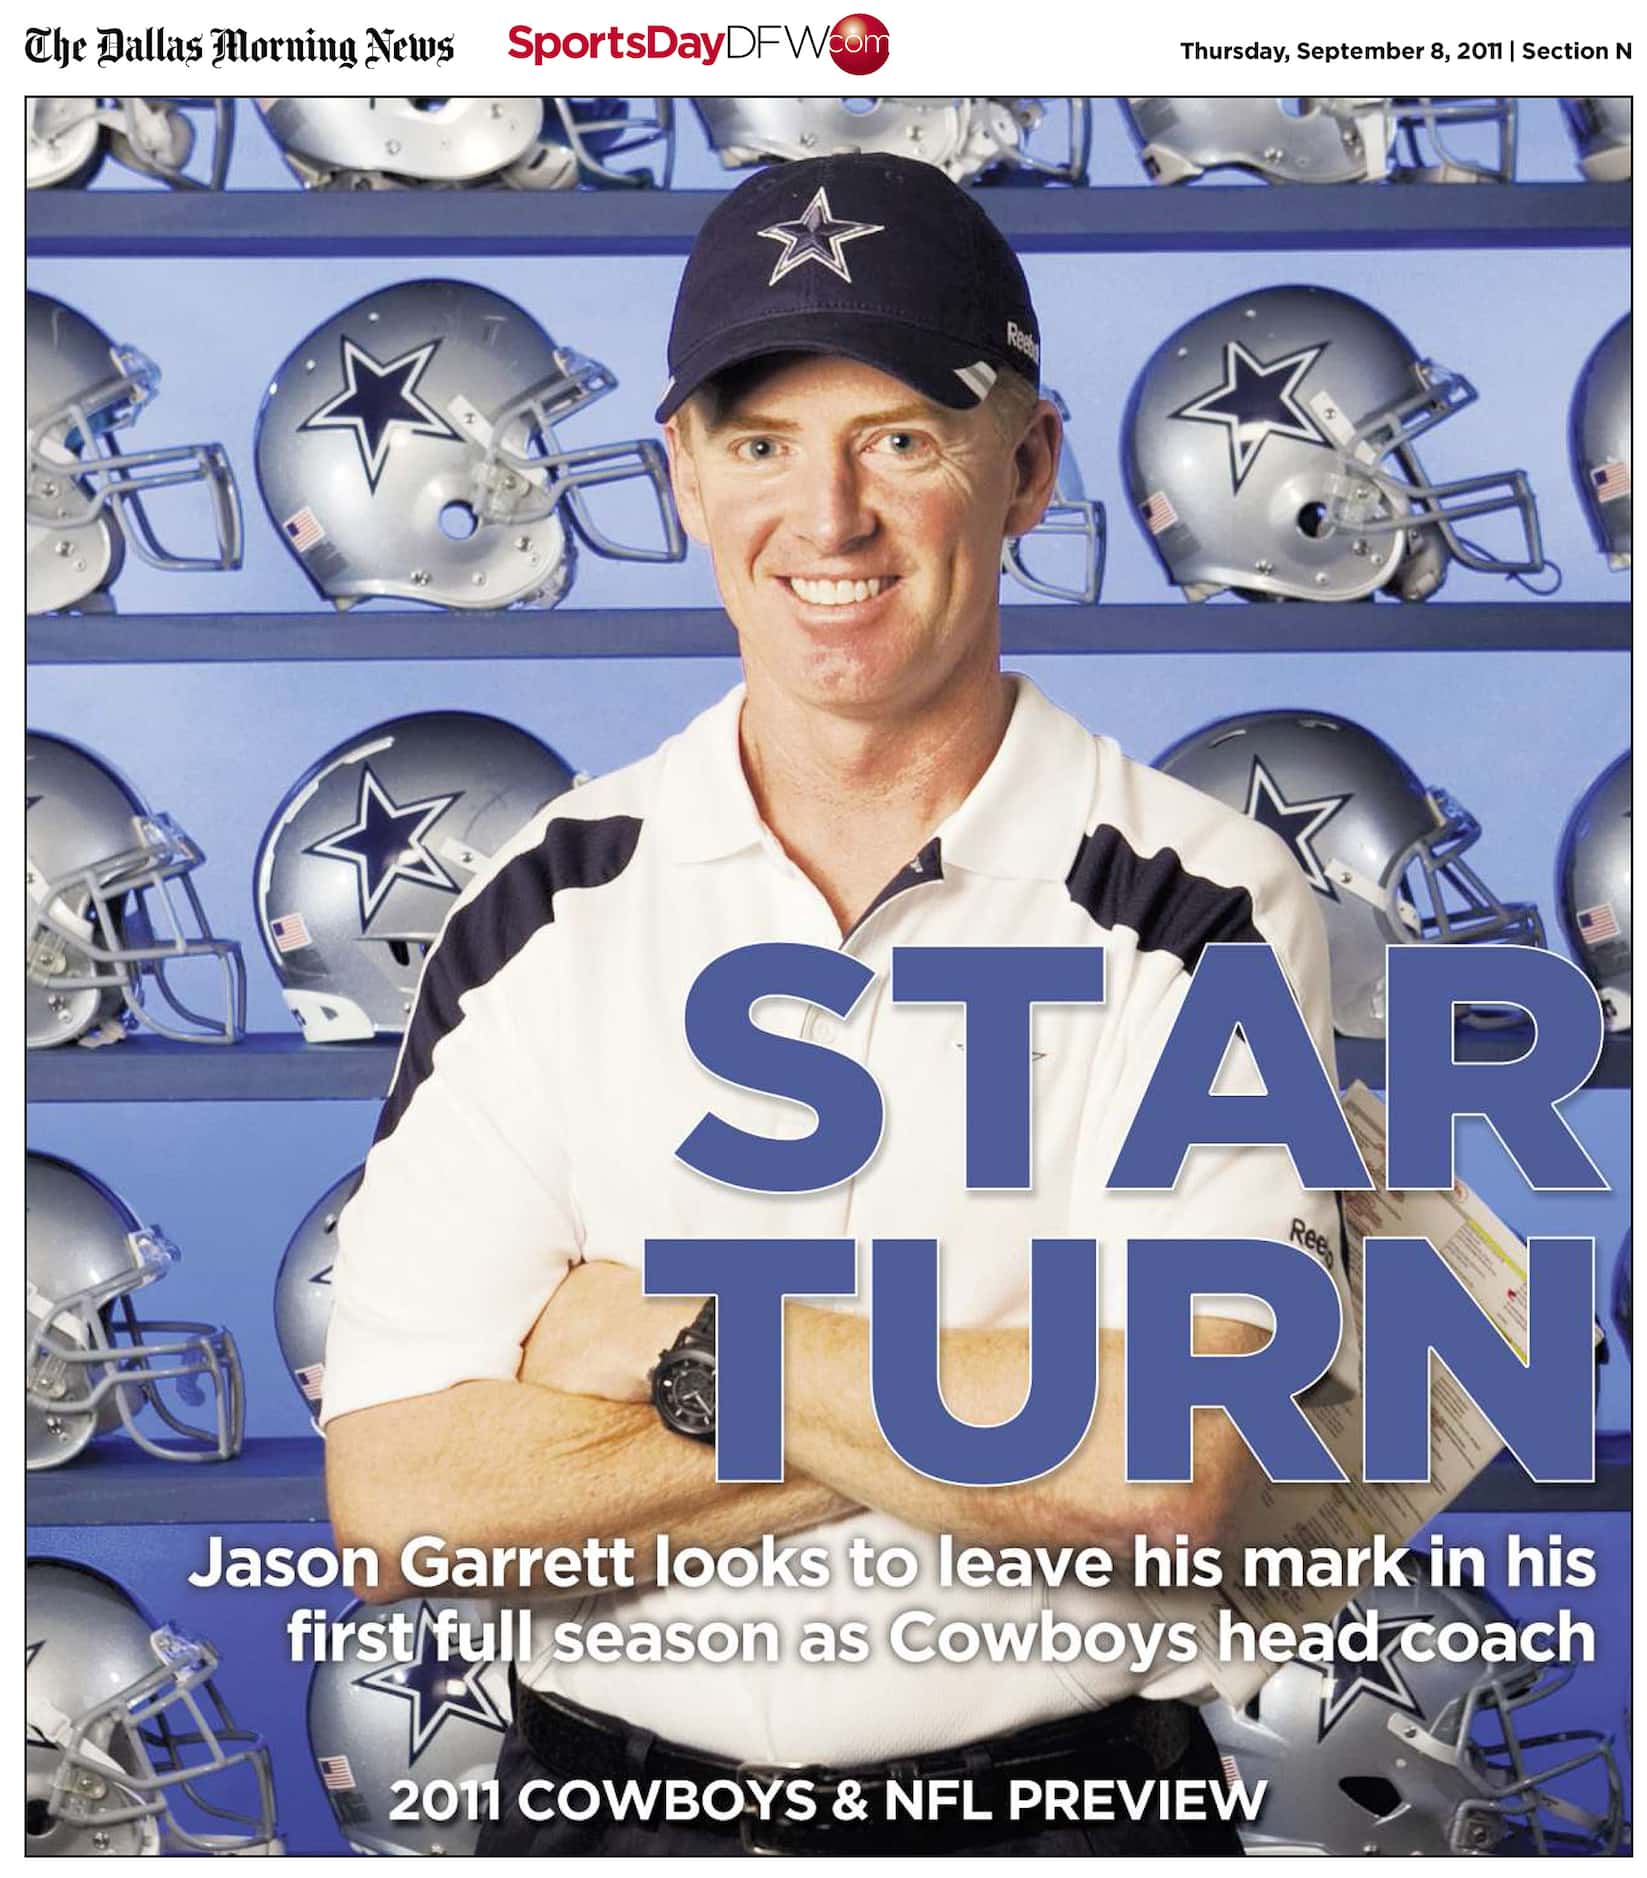 The cover of The Dallas Morning News' Cowboys preview section in 2011.